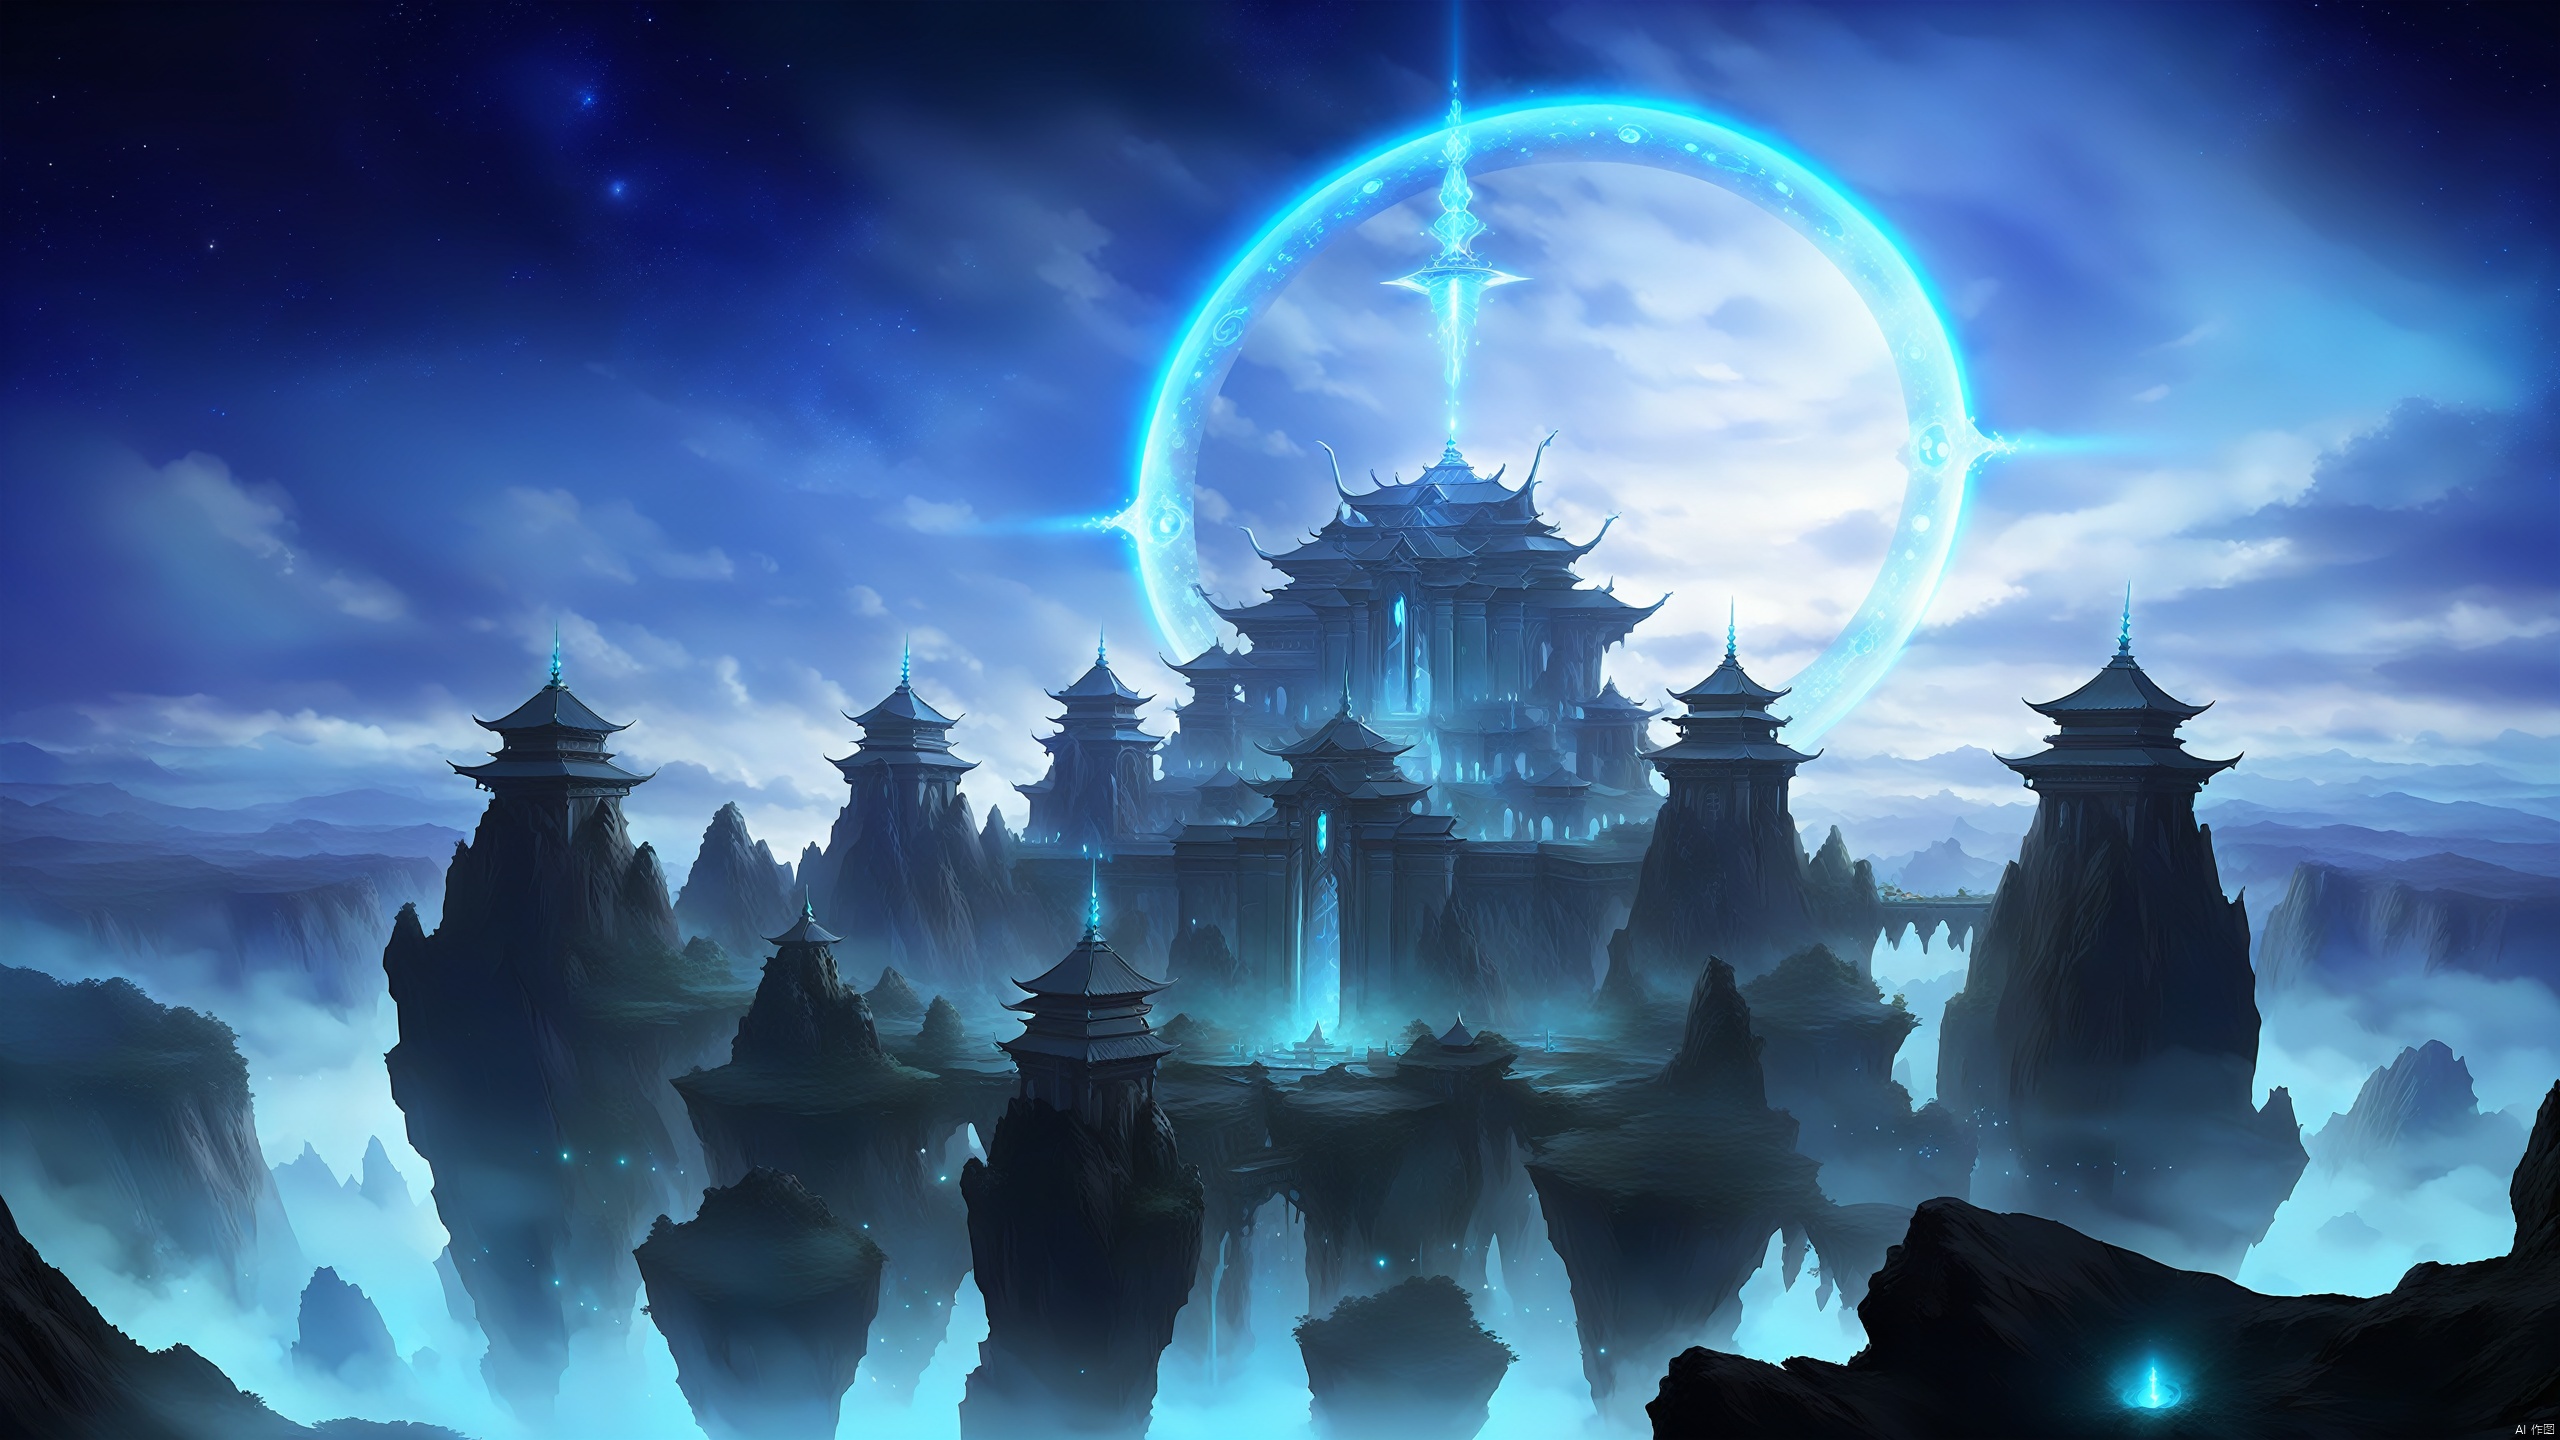 The majestic palace stands at the top of the sky, surrounded by a blue magic circle, solemn and majestic. At night, the palace looms under the moonlight, showing its mysterious cyan color. Practitioners step into it and feel the majesty and solemnity of the magic power.